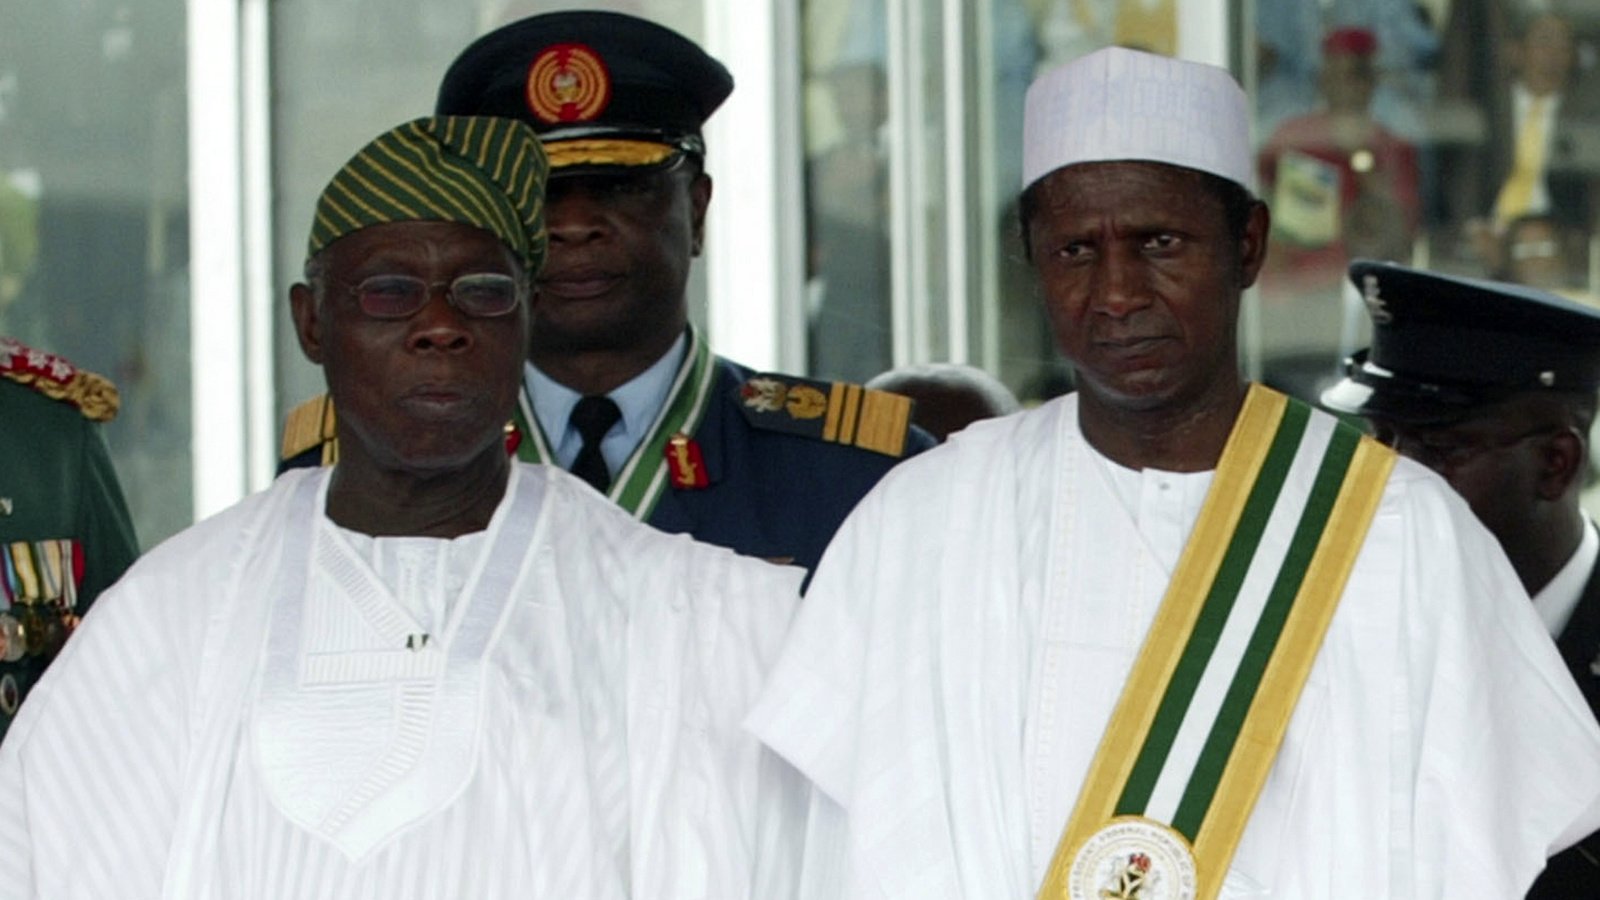 Obasanjo Reveals Why He Backed Yar’Adua Despite Health Issues